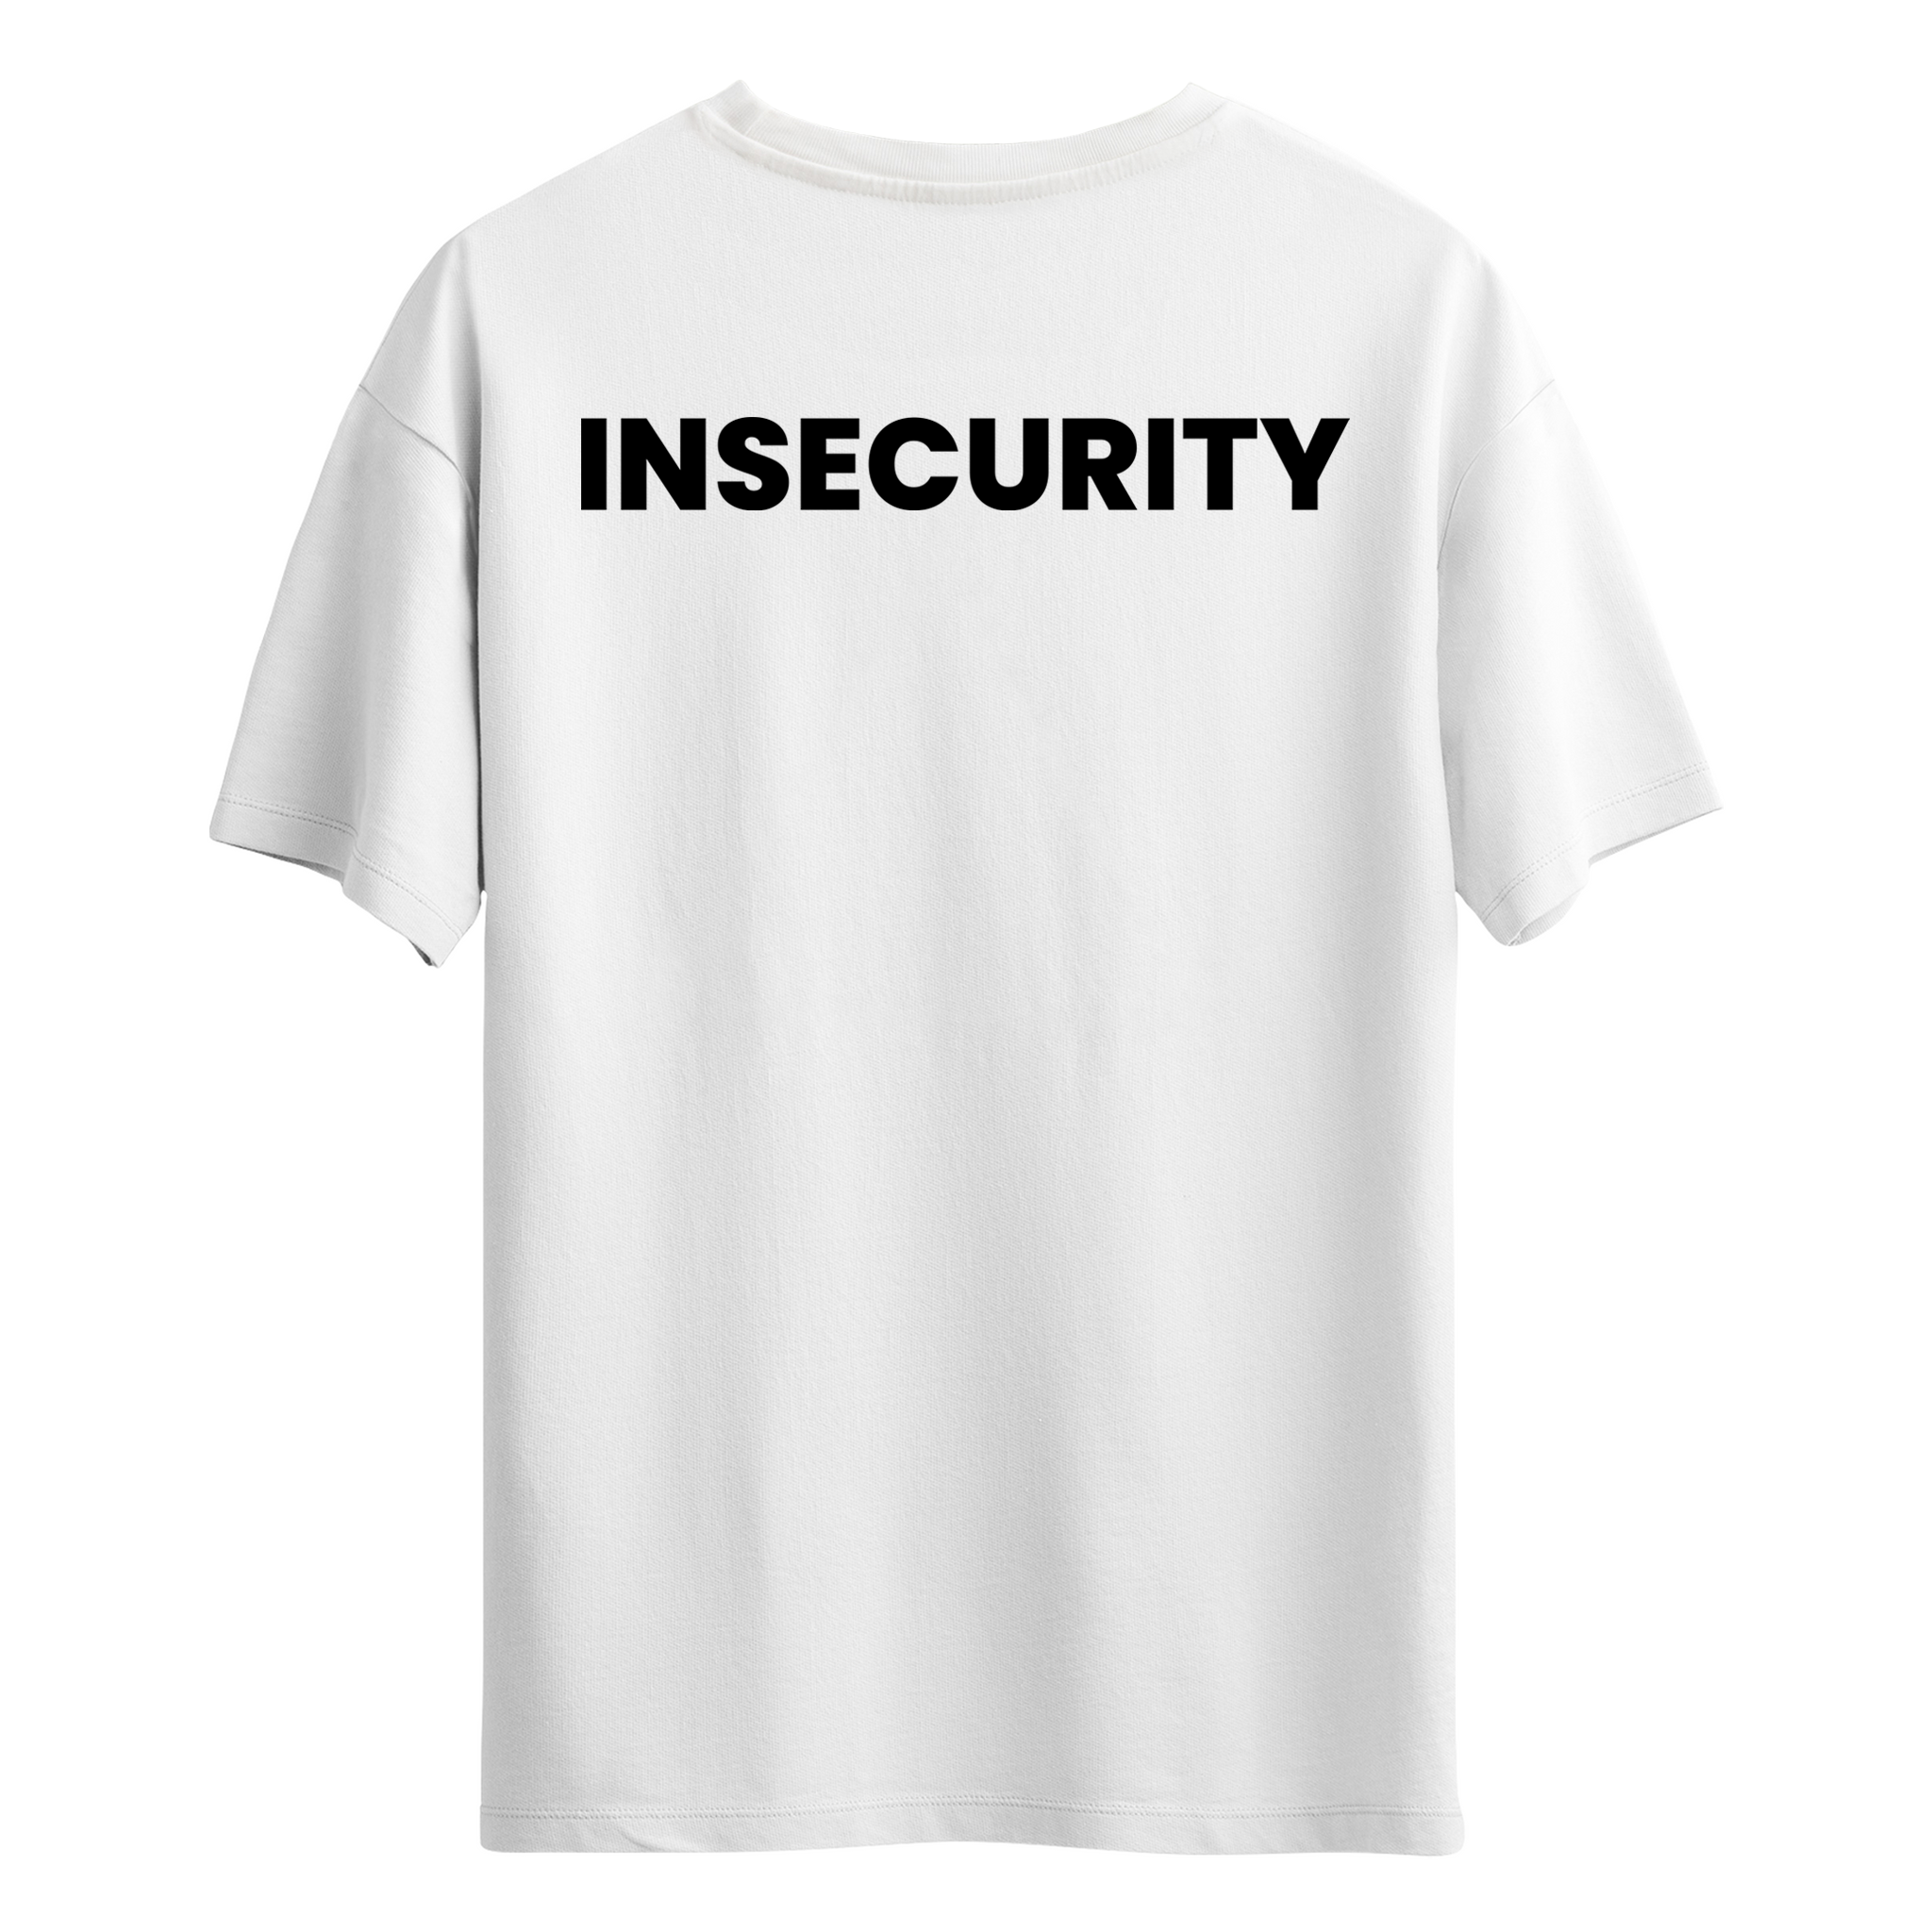 Insecurity - T-Shirt